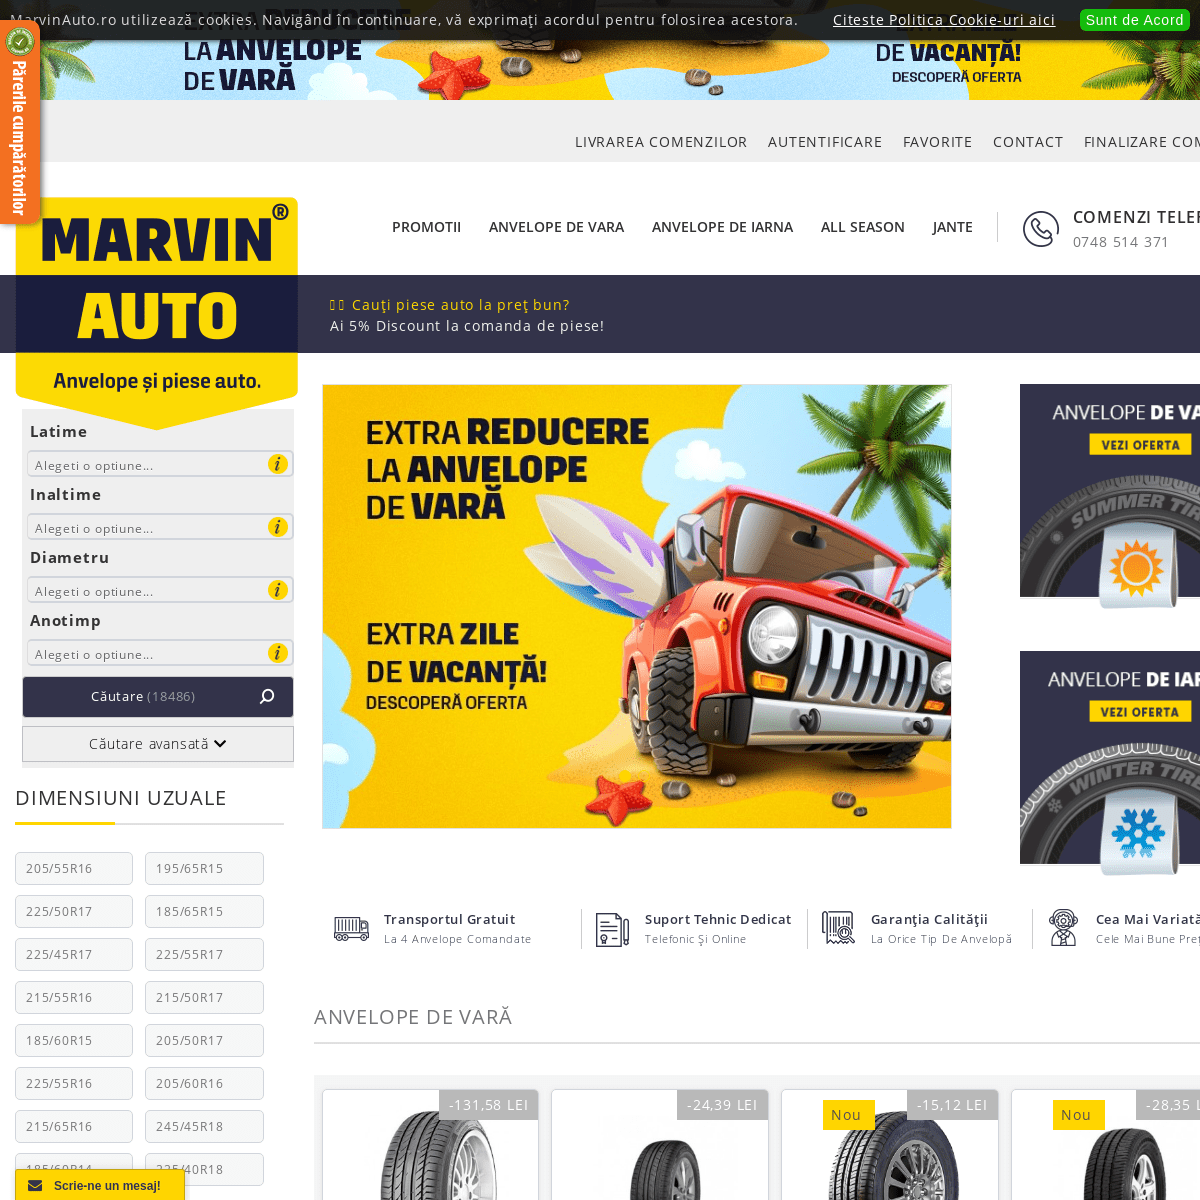 A complete backup of marvinauto.ro